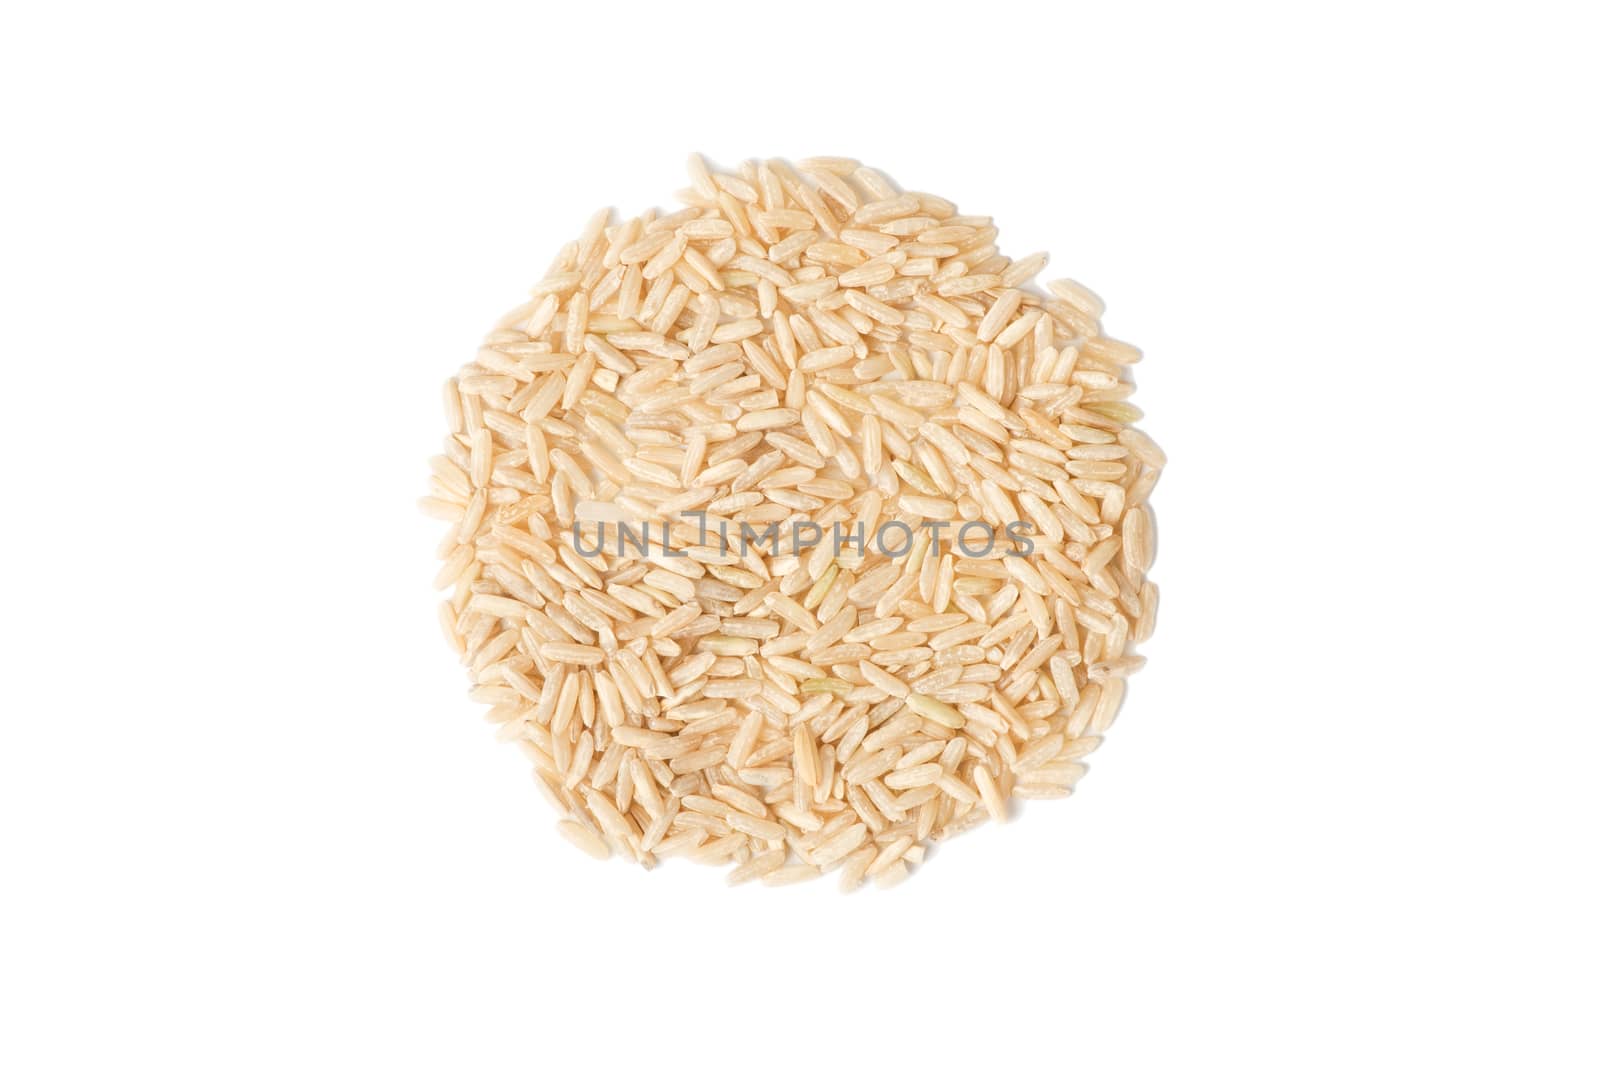 Raw brown rice isolated on white background, top view  by iprachenko